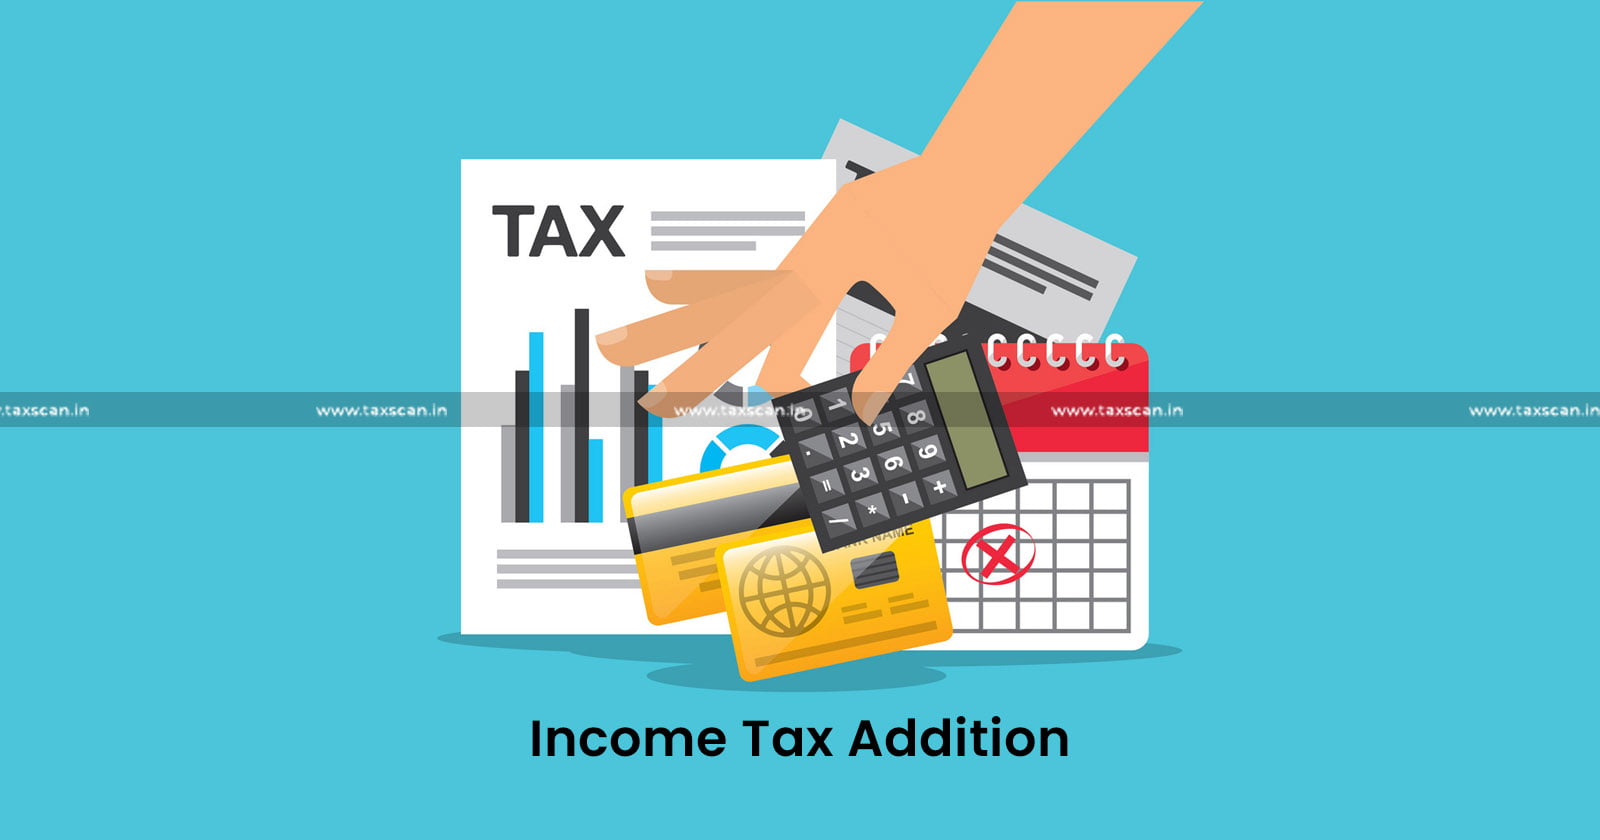 Income Tax Addition - Income Tax - Income Tax Act - Examining and Finding Fault in Cash Book - taxscan